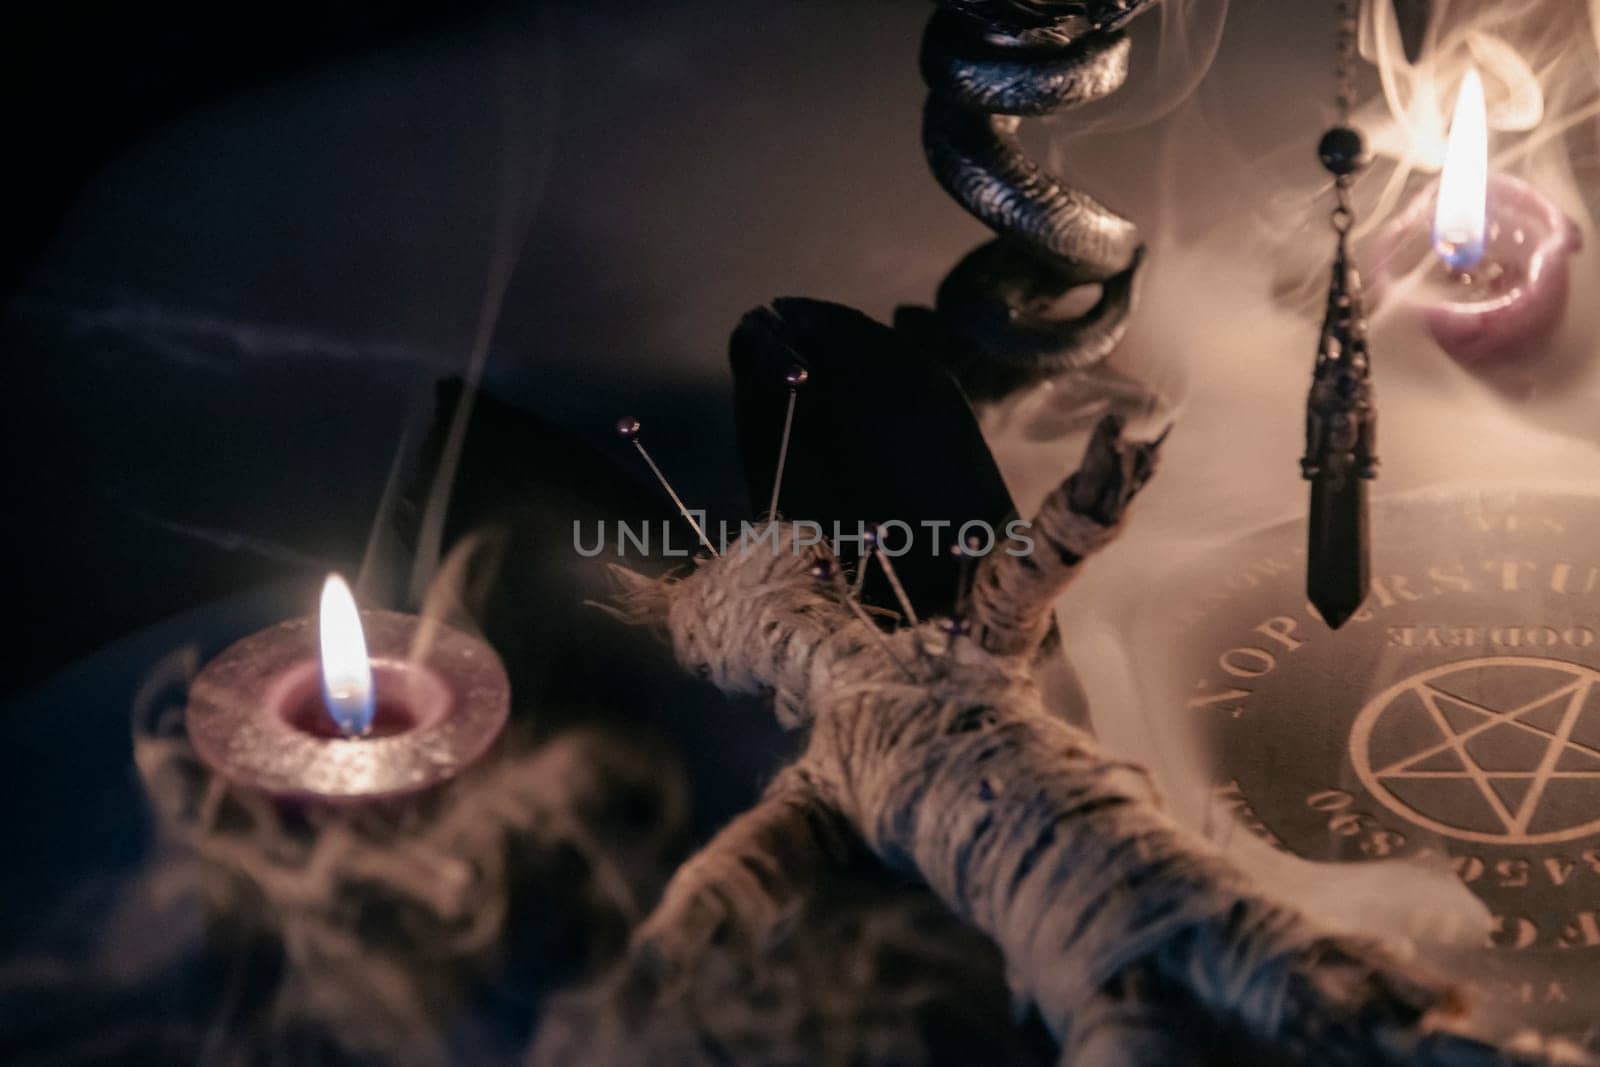 A haunting occult setup featuring a pendulum, mystical symbols, candles, a voodoo doll, and a ritual goblet amidst swirling smoke. by jbruiz78